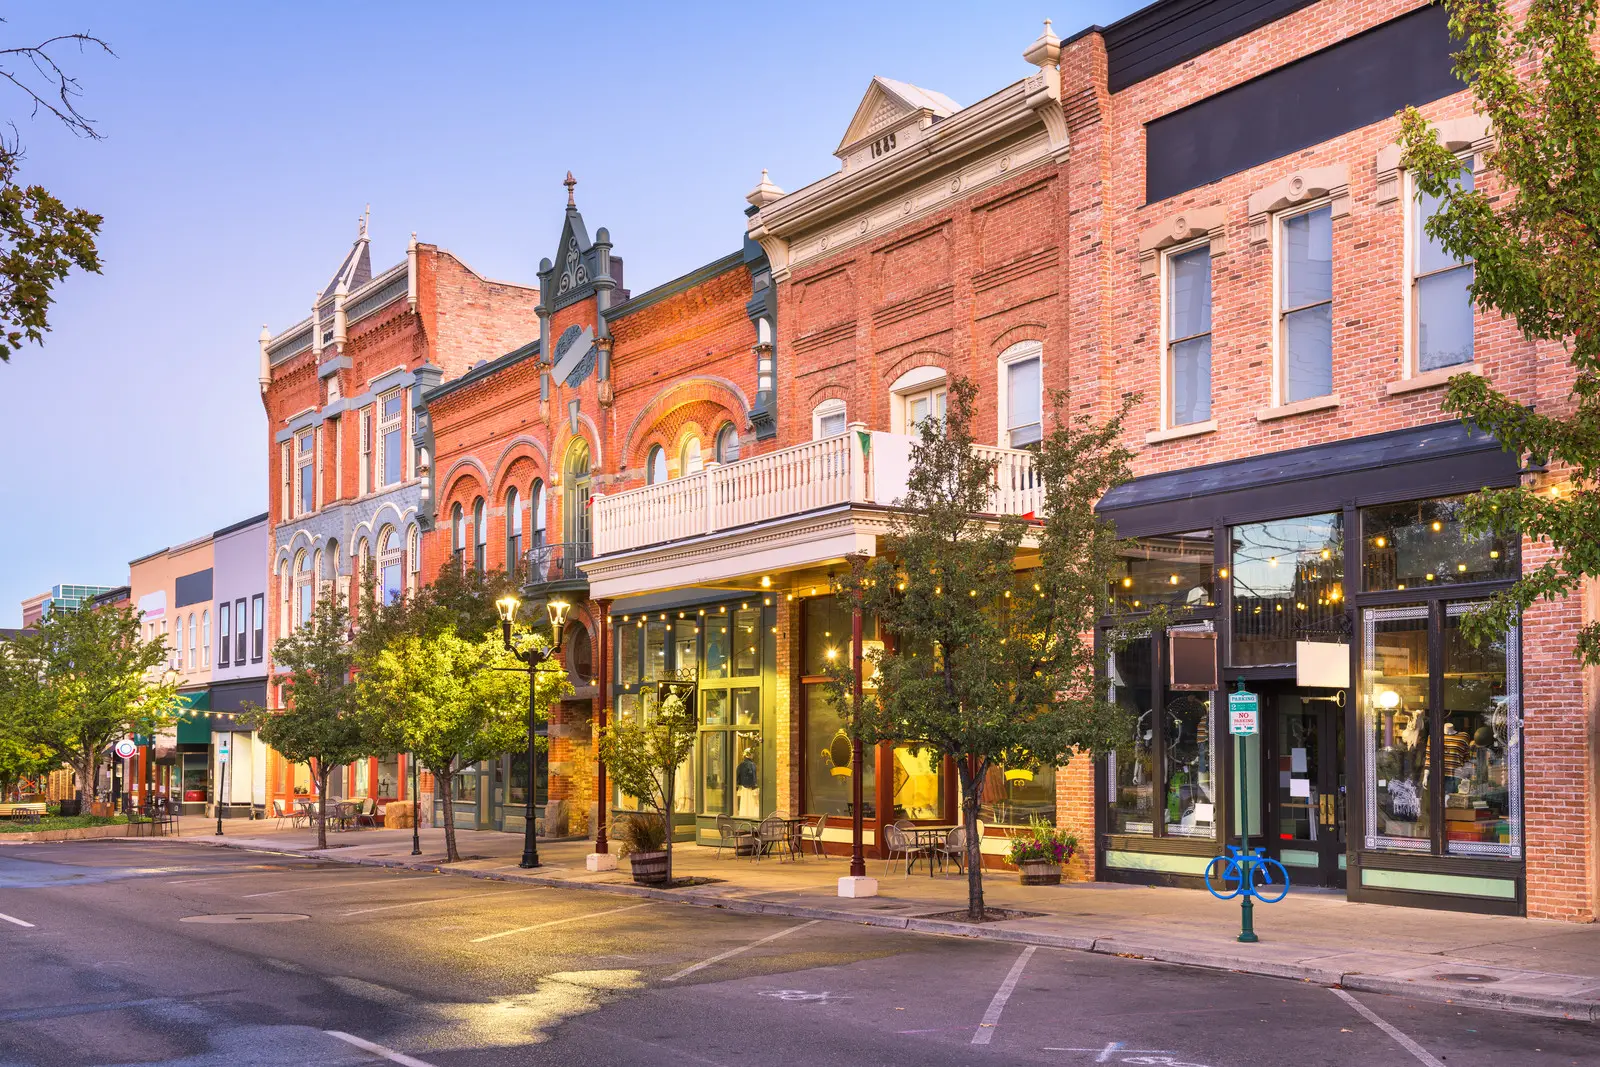 Downtown main street with older brick buildings lining the street